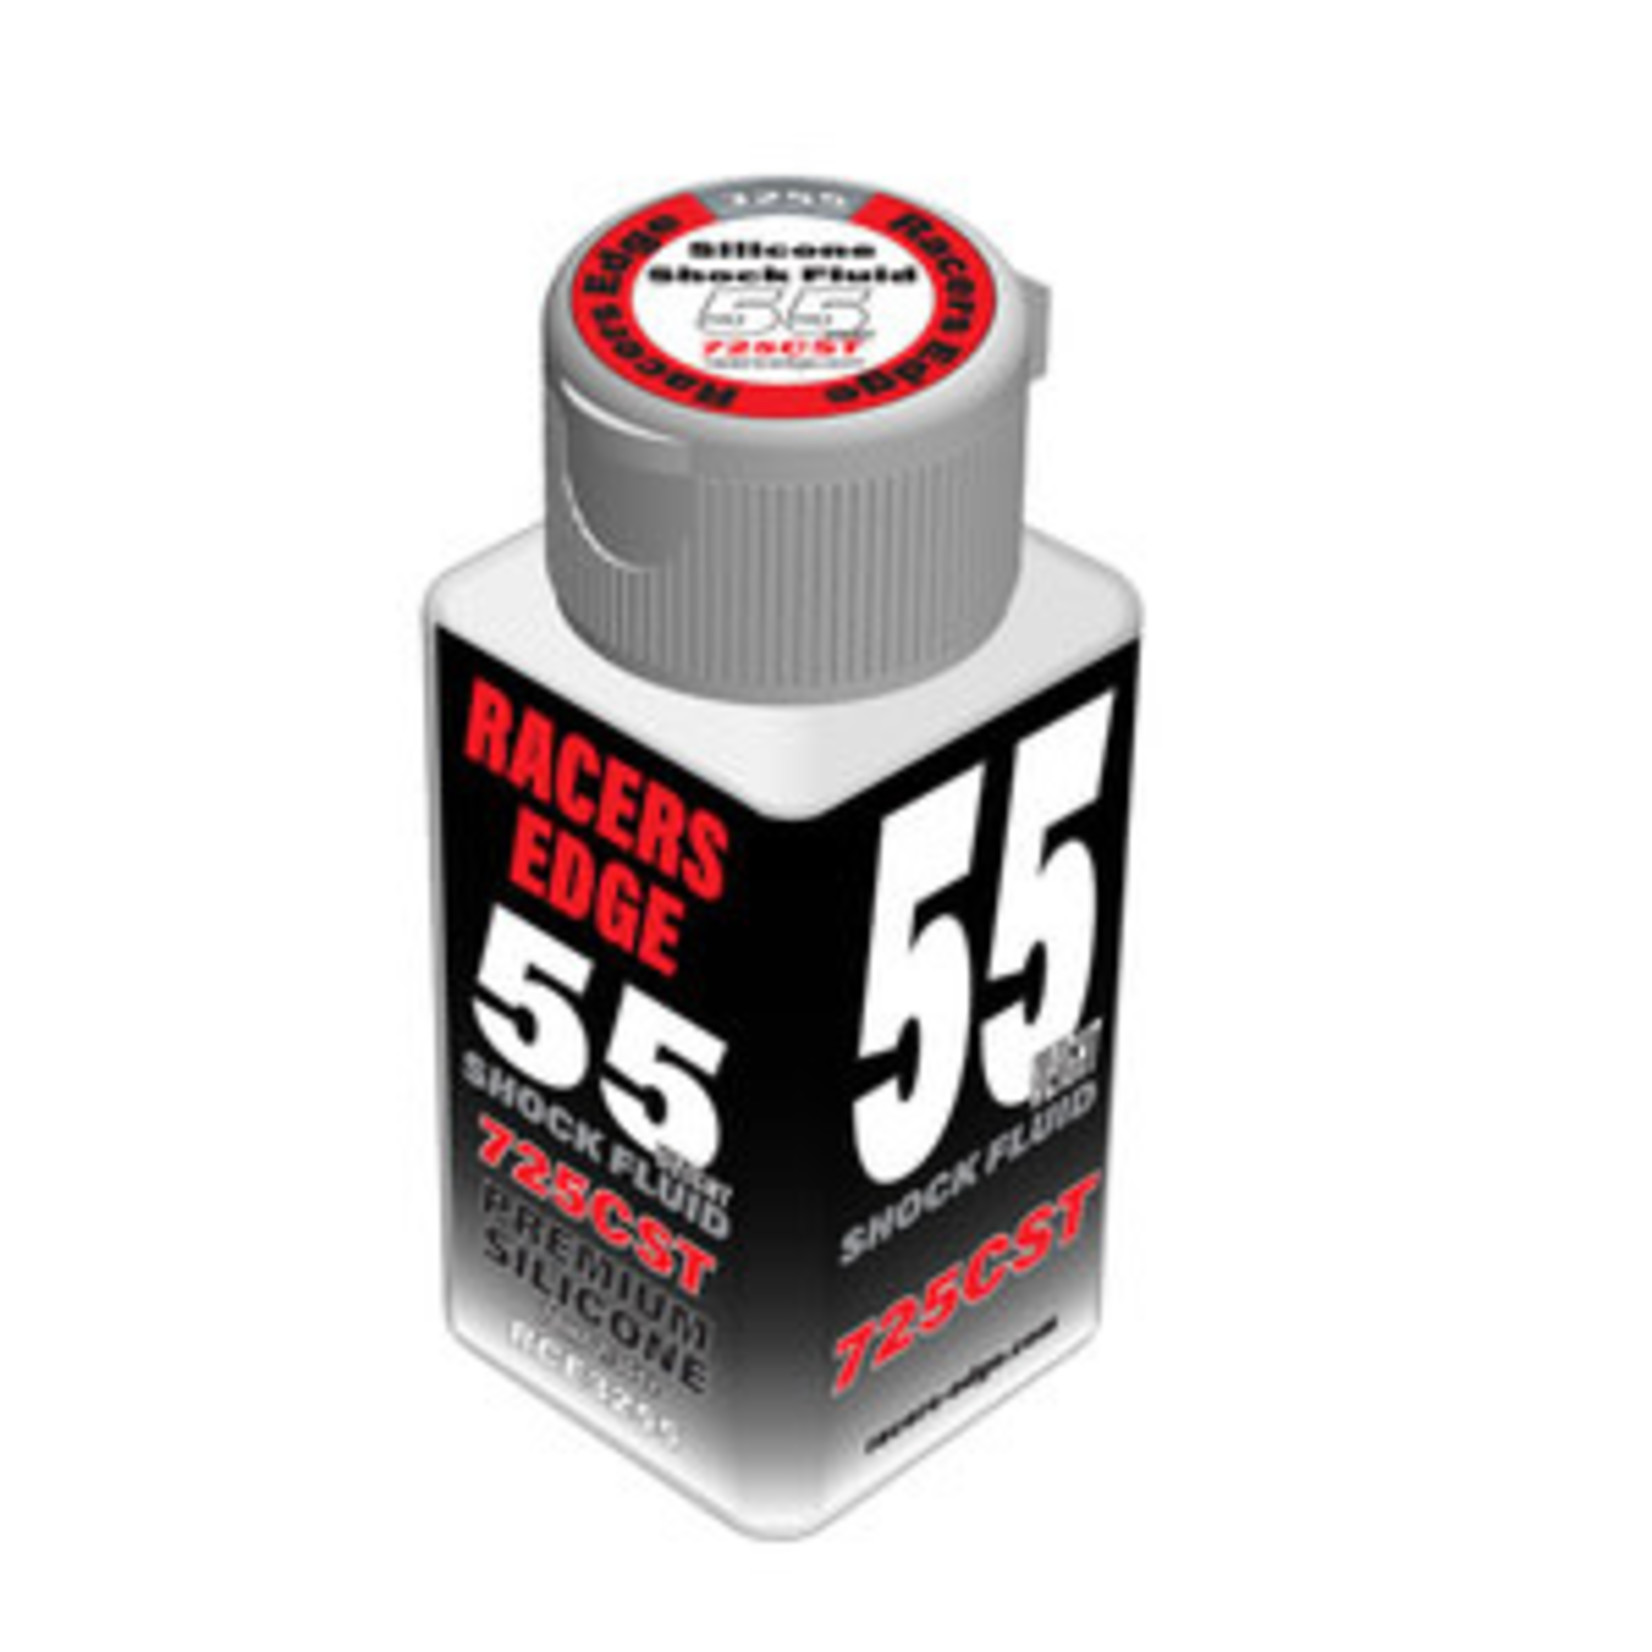 Racers Edge 55 Weight, 725cSt, 70ml 2.36oz Pure Silicone Shock Oil